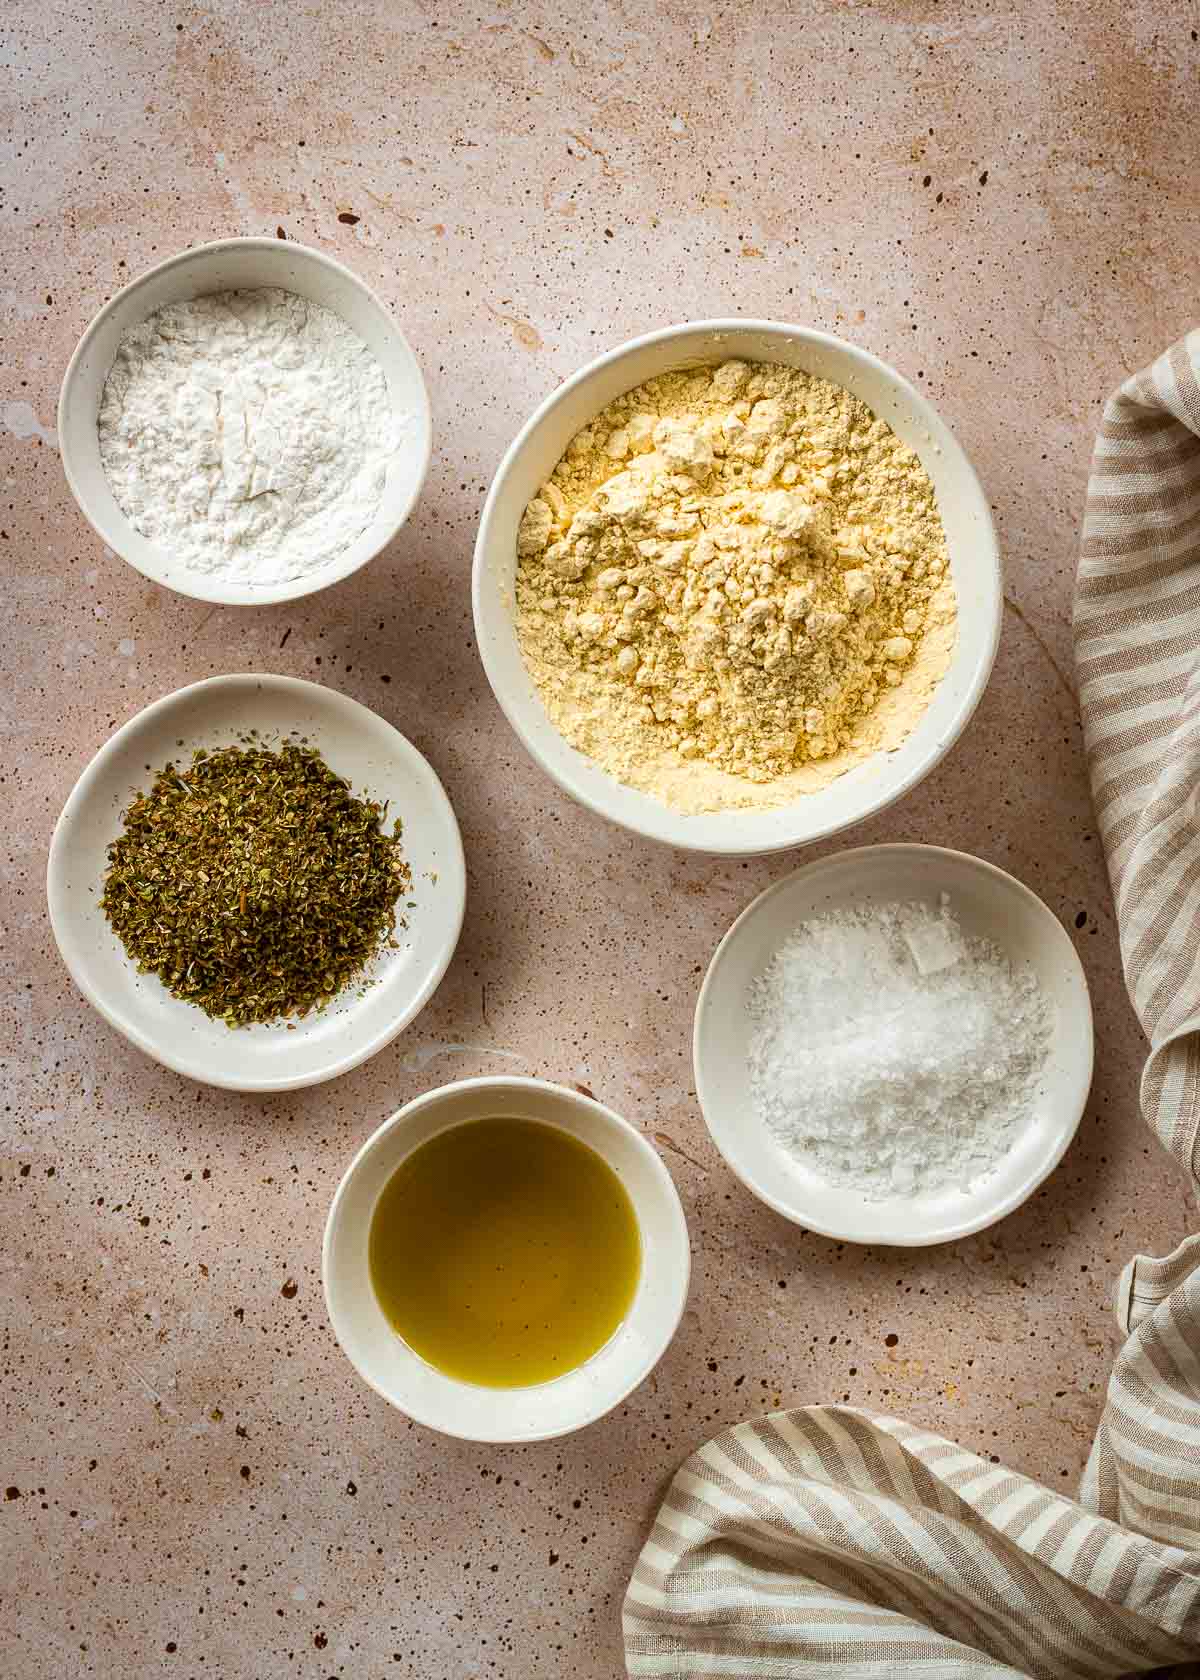 Ingredients for chickpea flour pizza crust.